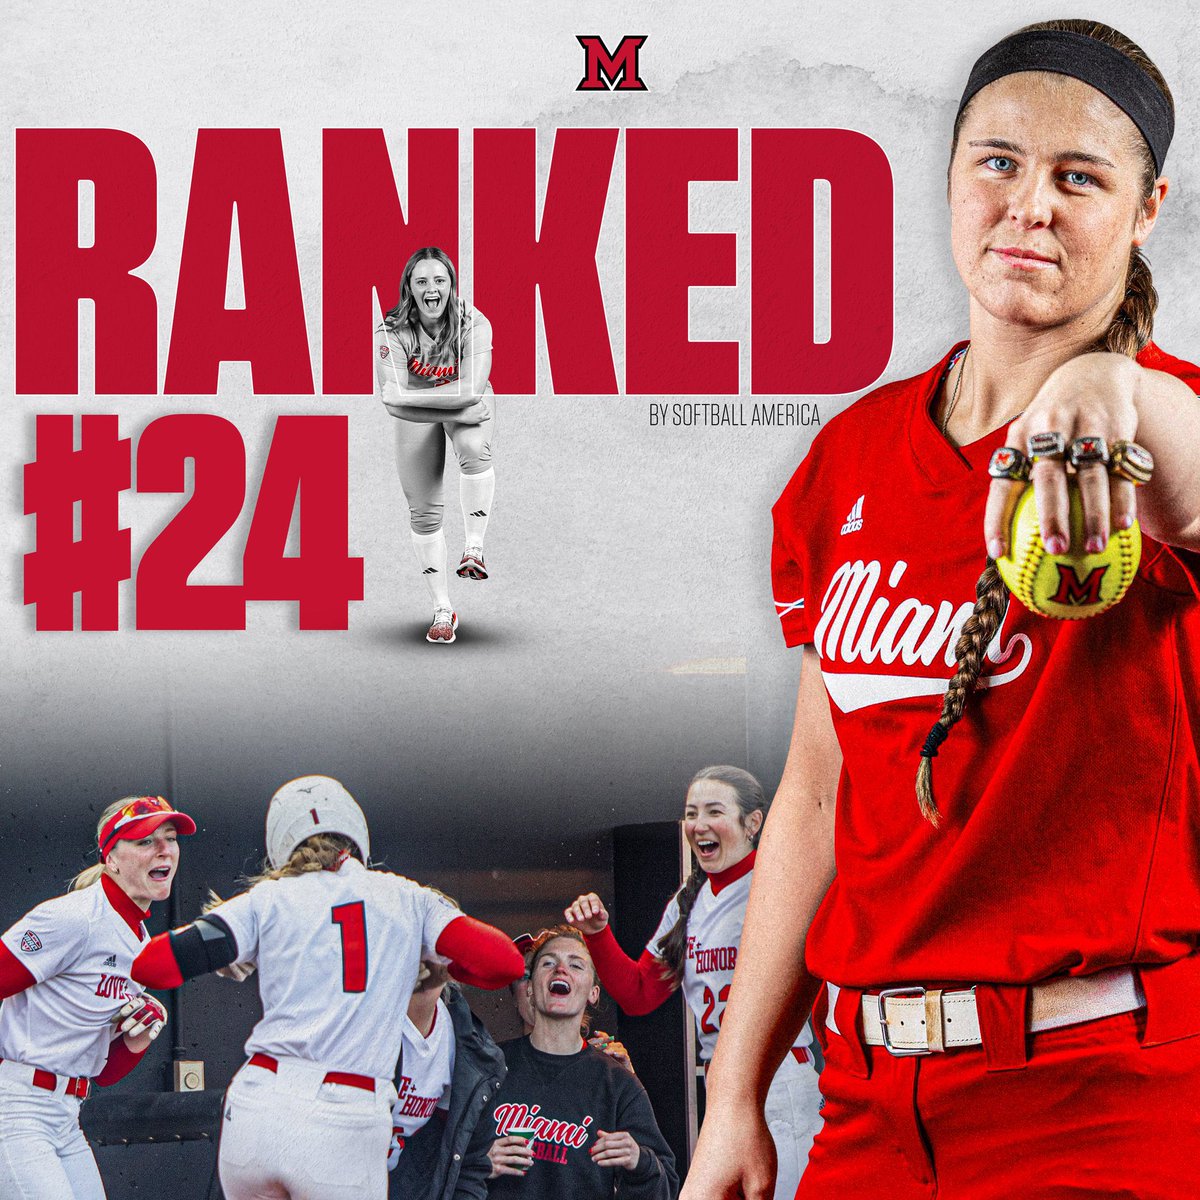 ‼️ 𝐑𝐀𝐍𝐊𝐄𝐃 ‼️ For the first time in program history, your RedHawks have been ranked #𝟐𝟒 in the country by @SoftbalAmerica #RiseUpRedHawks